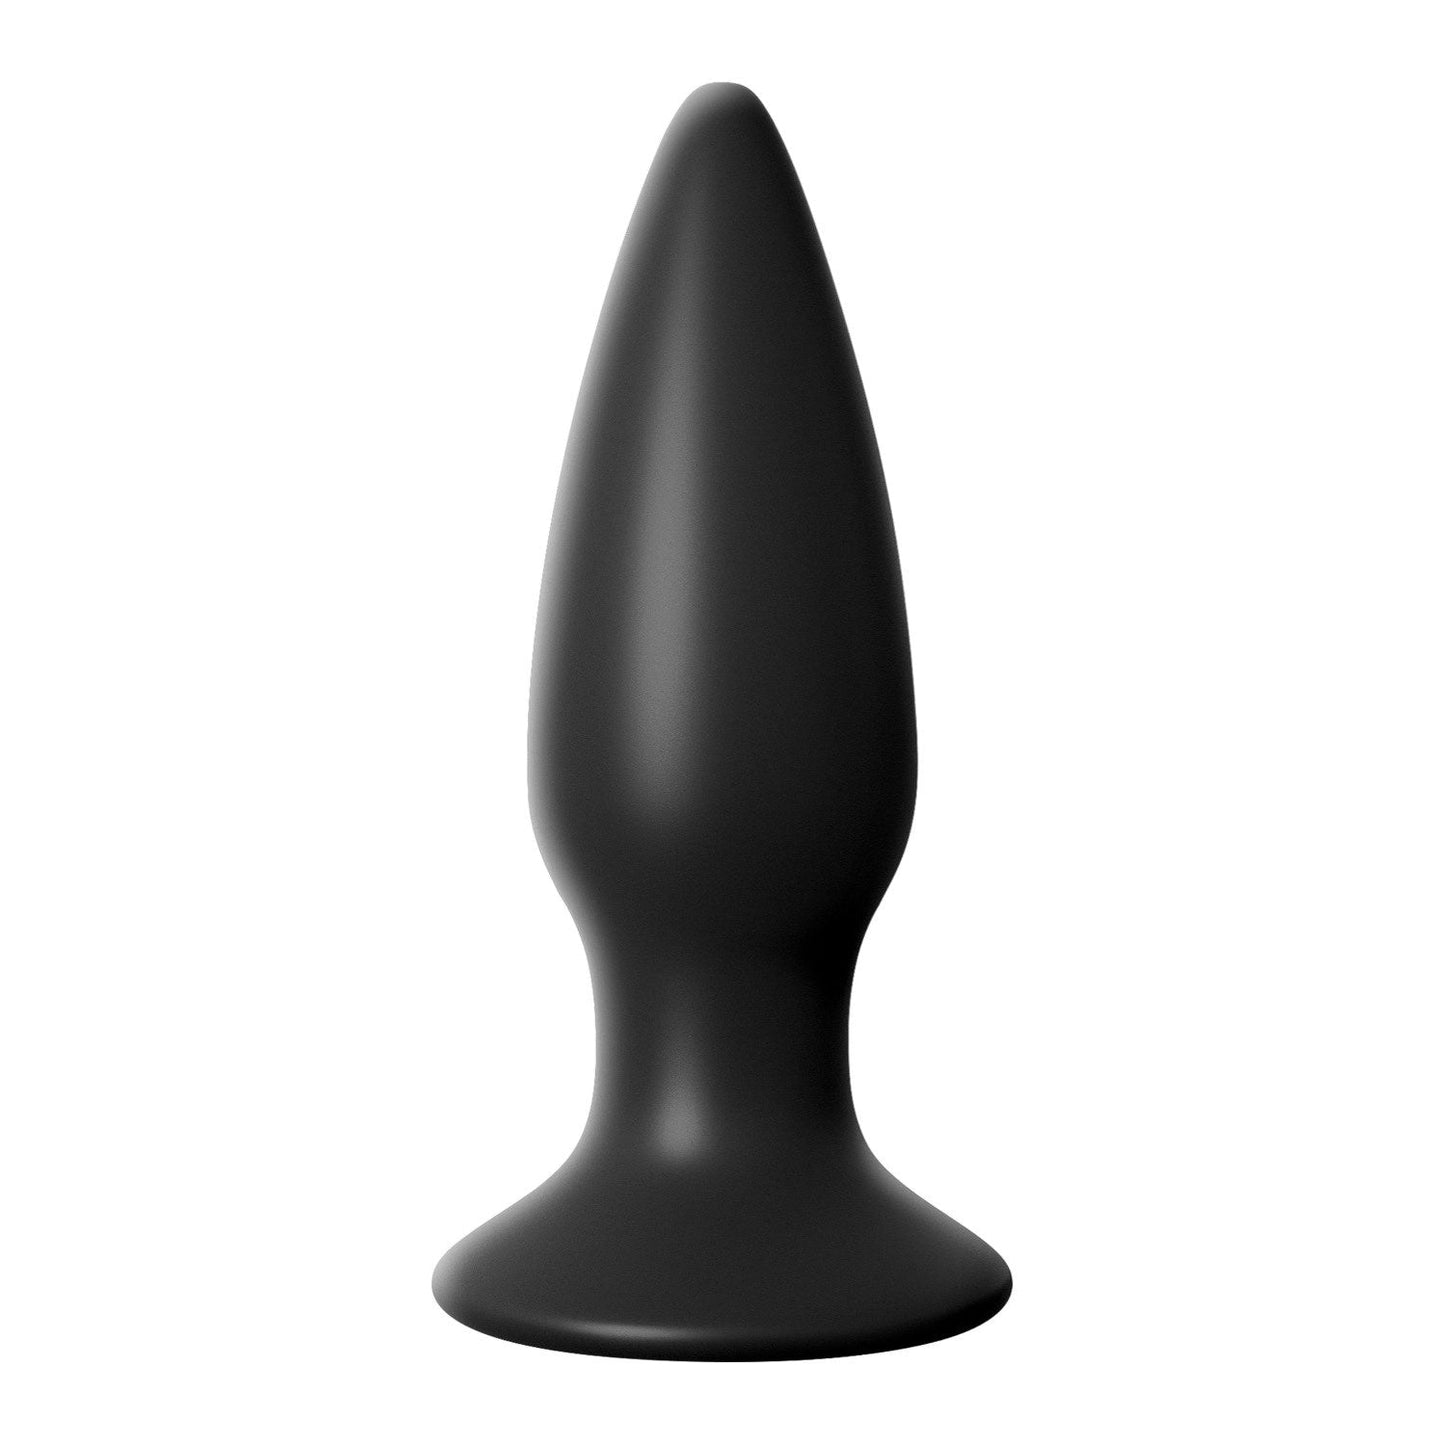 Collection Small Rechargeable Anal Plug - Black 10.9 cm (4.3") USB Rechargeable Vibrating Butt Plug